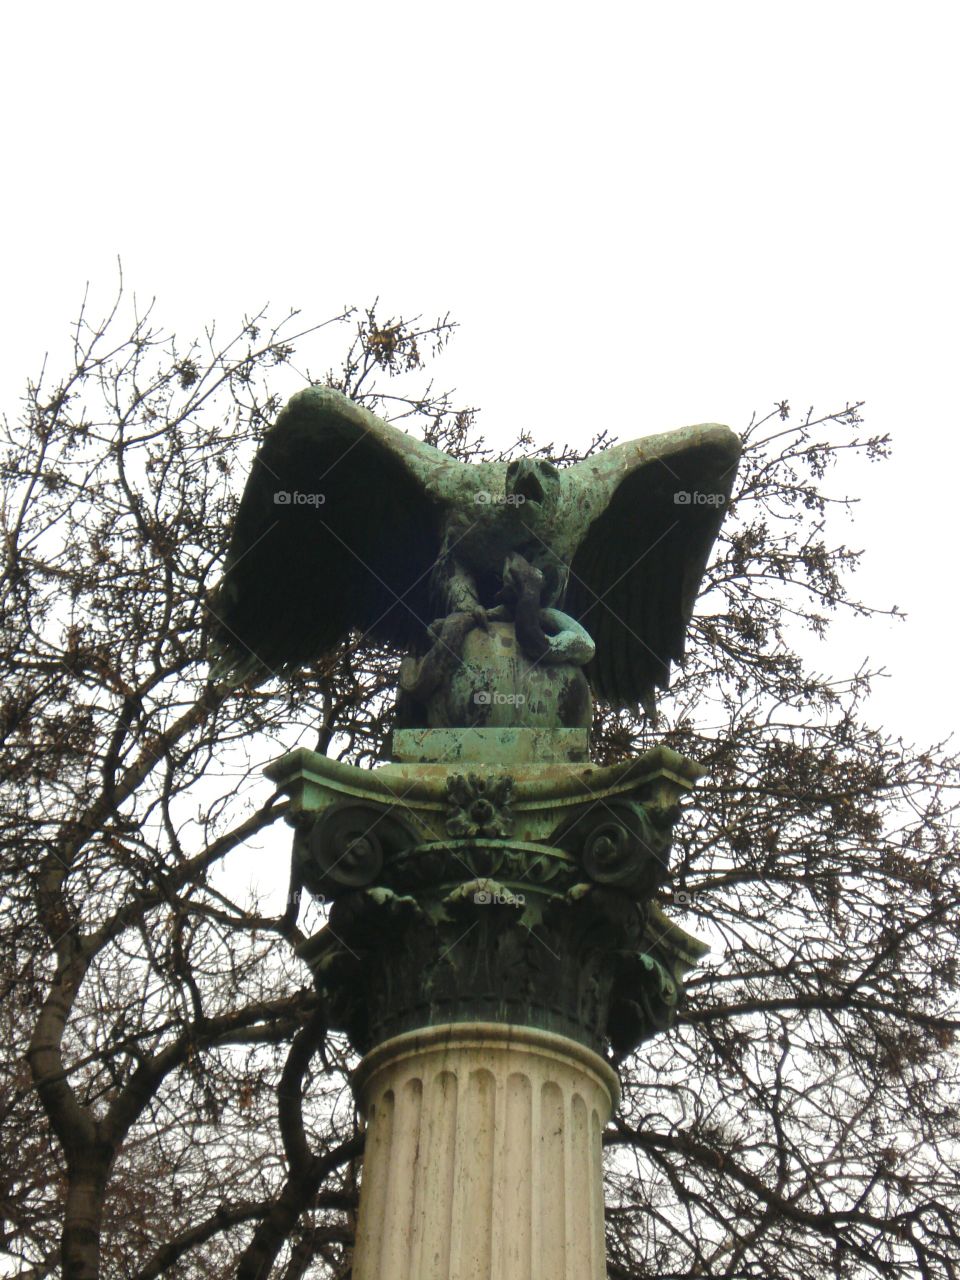 Statue of Mythical Turul Bird at the Eastern Foot of Gellért Hill in Budapest